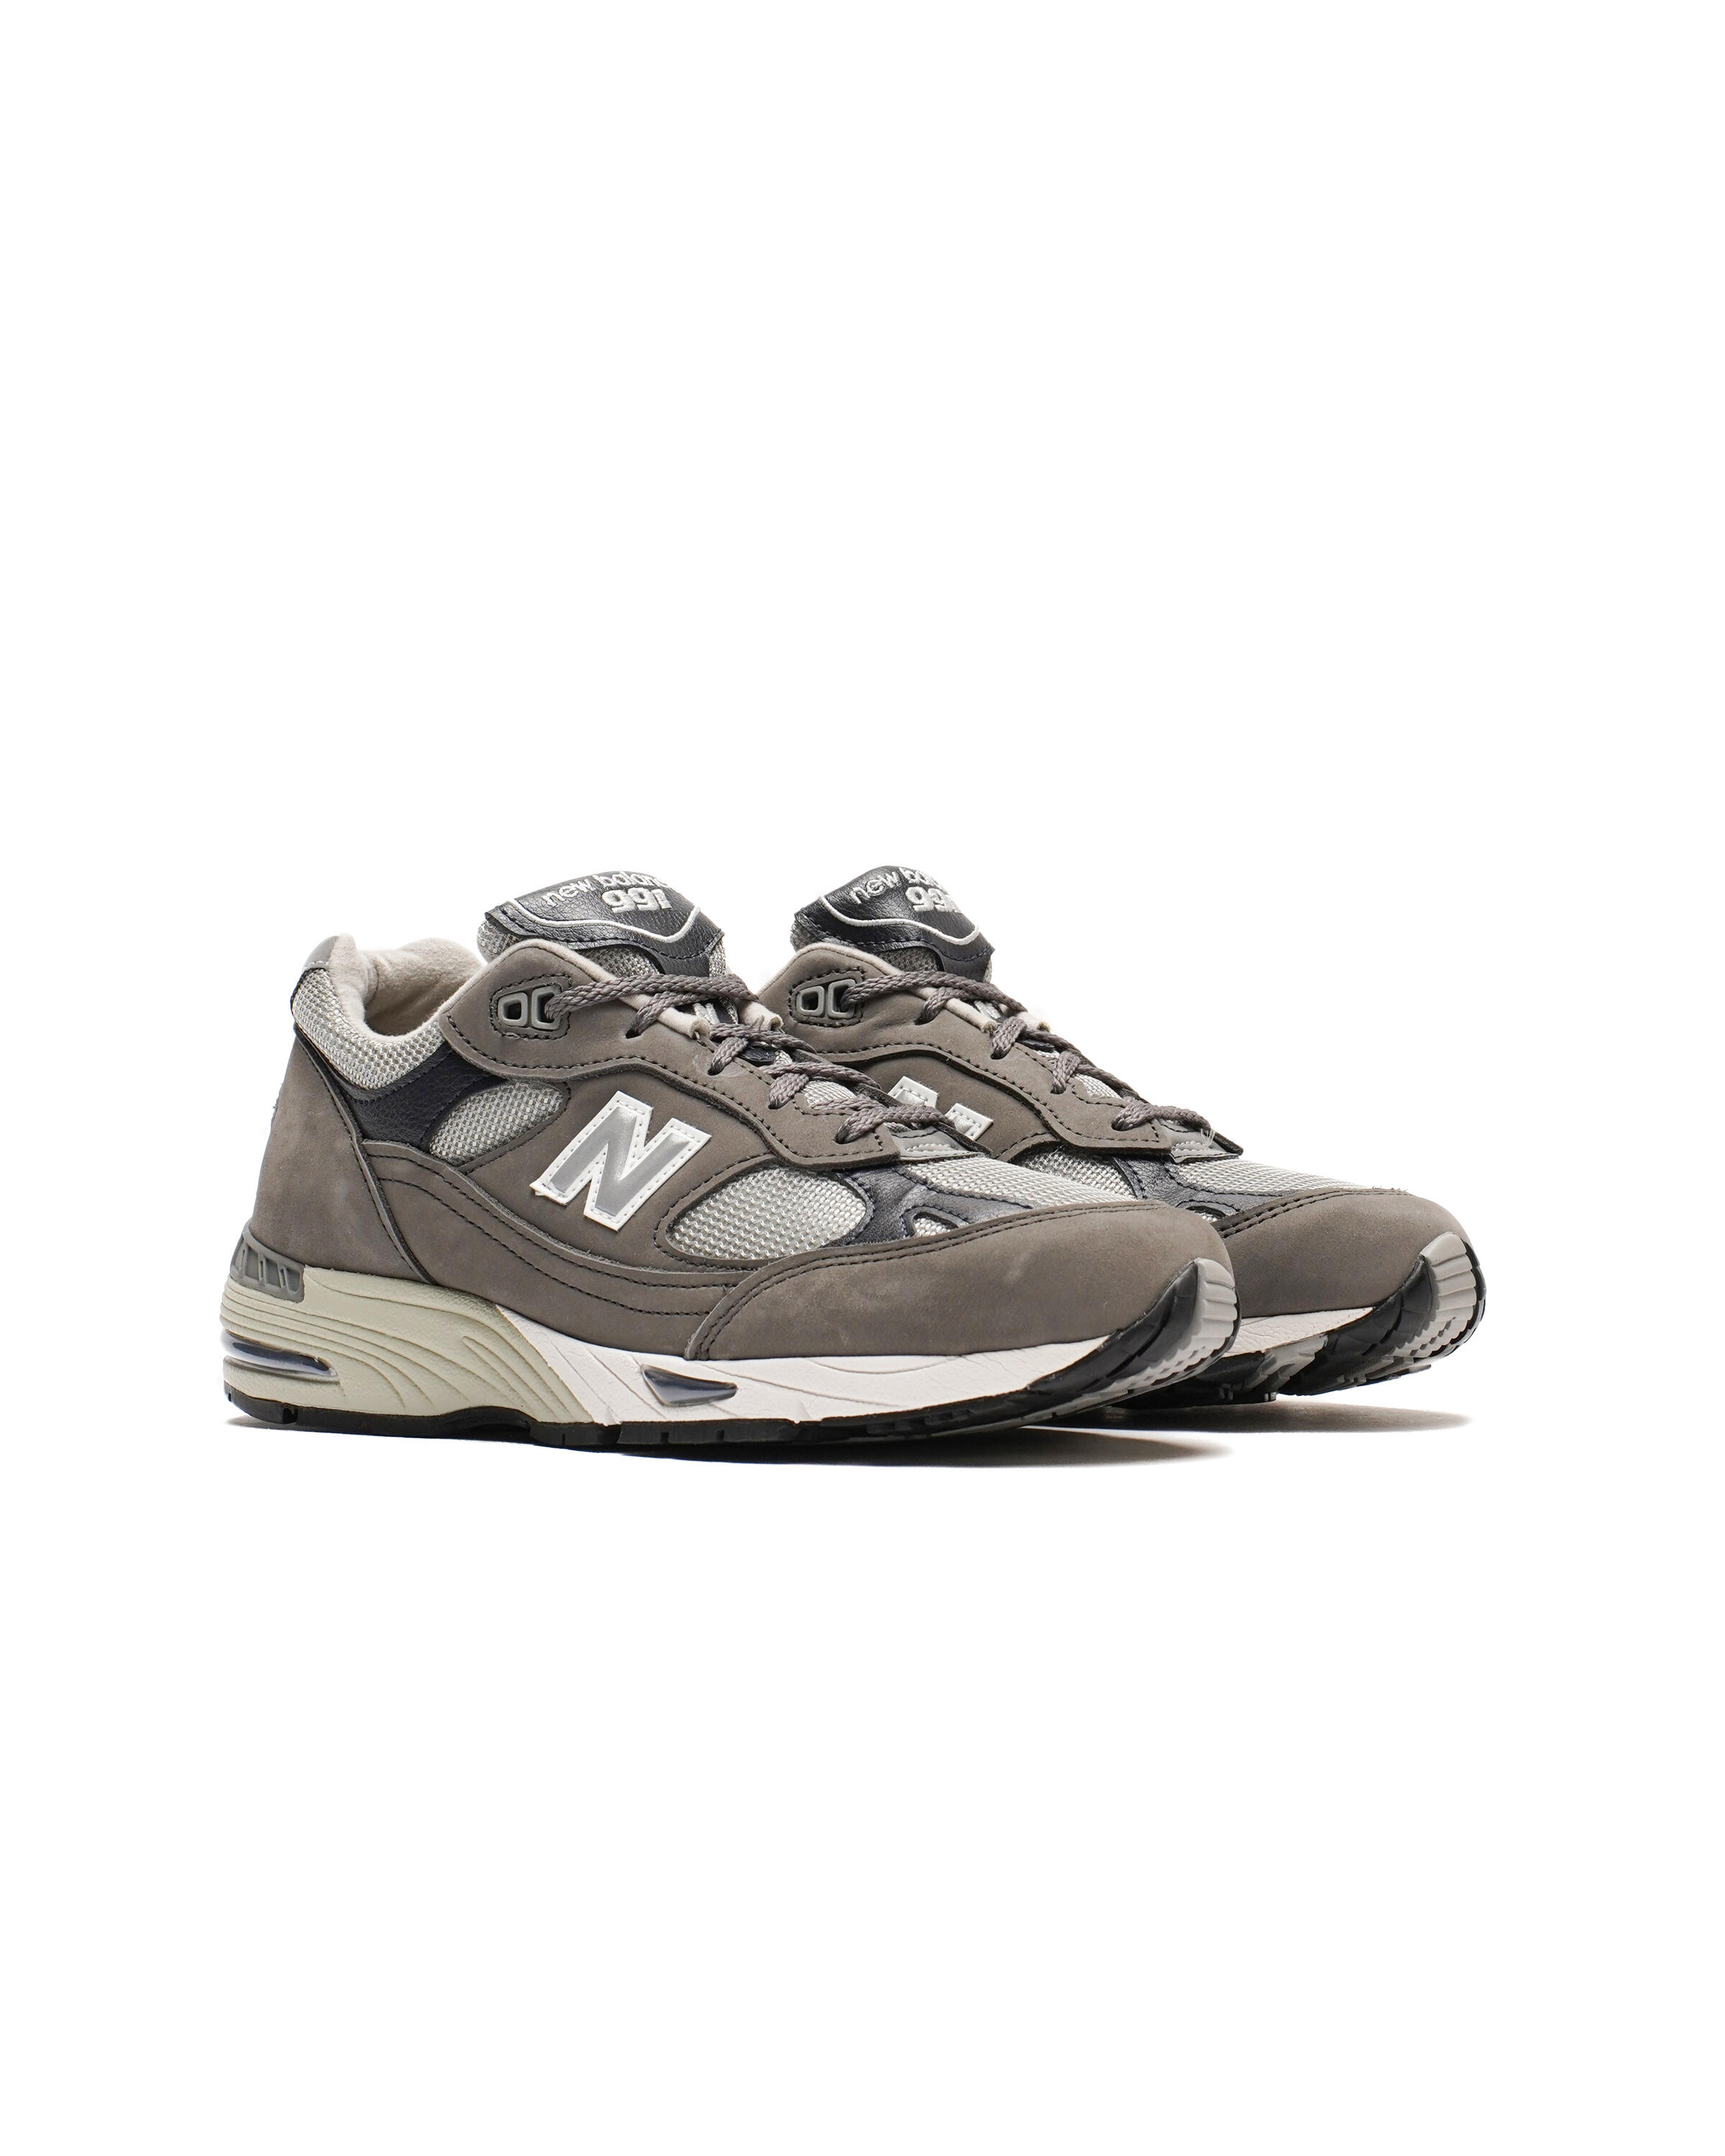 New Balance WMNS 991 GNS - Made in England